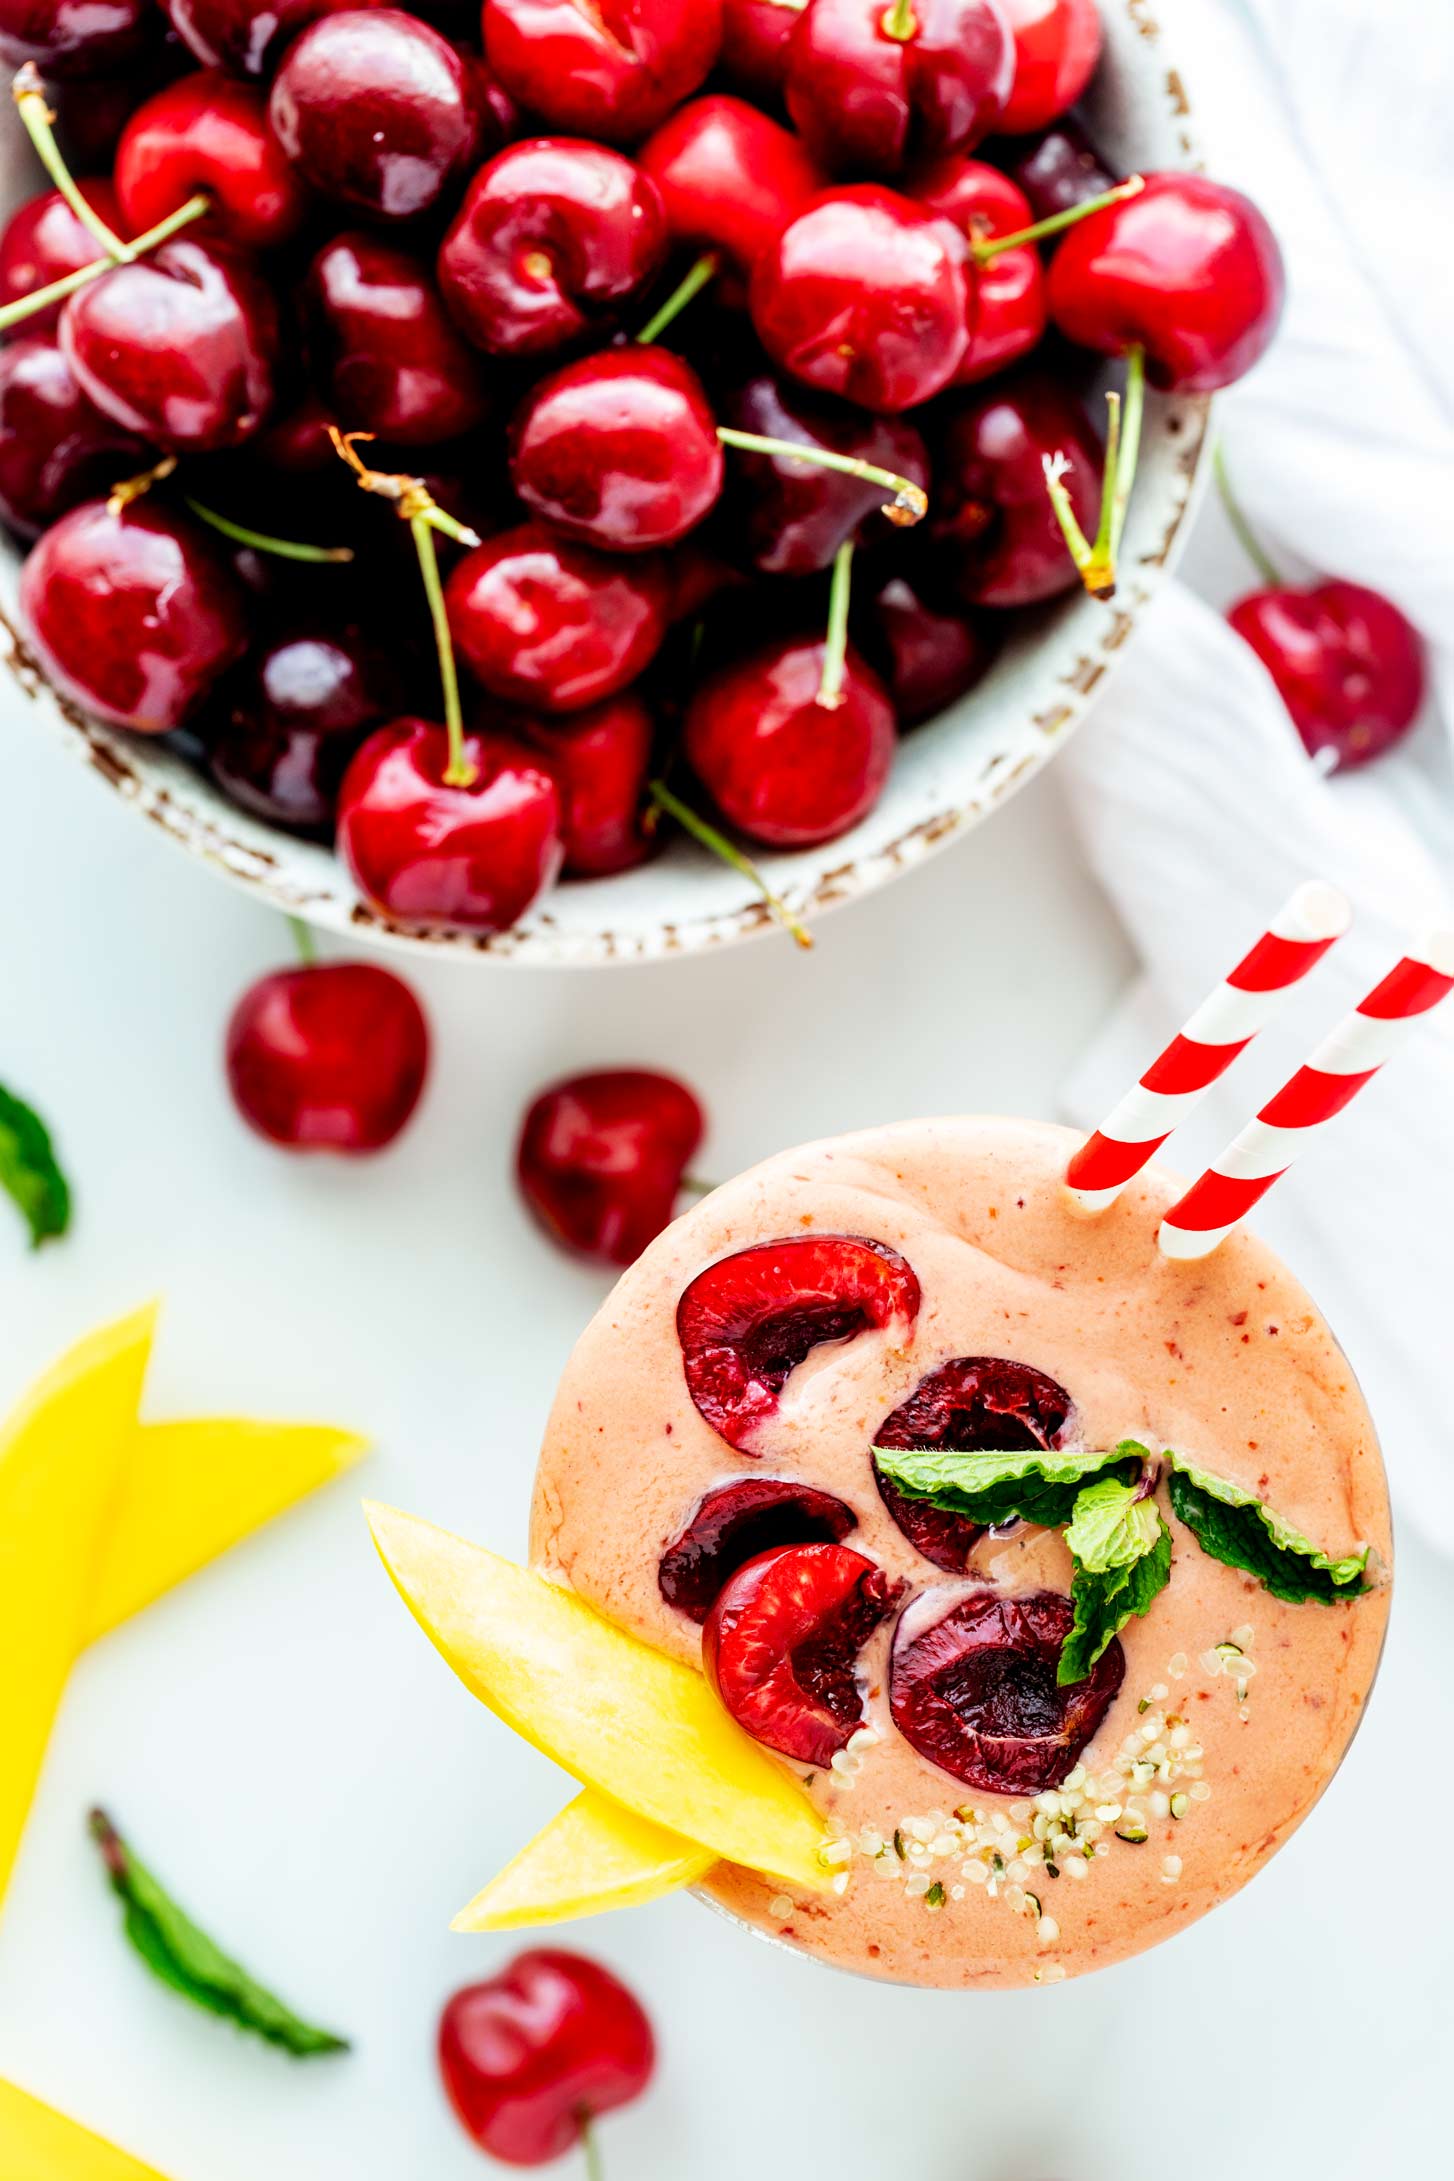 Overhead photo of a cherry mango smoothie garnished with fresh cherries, mango slices, and mint and sitting next to a bowl of fresh cherries.